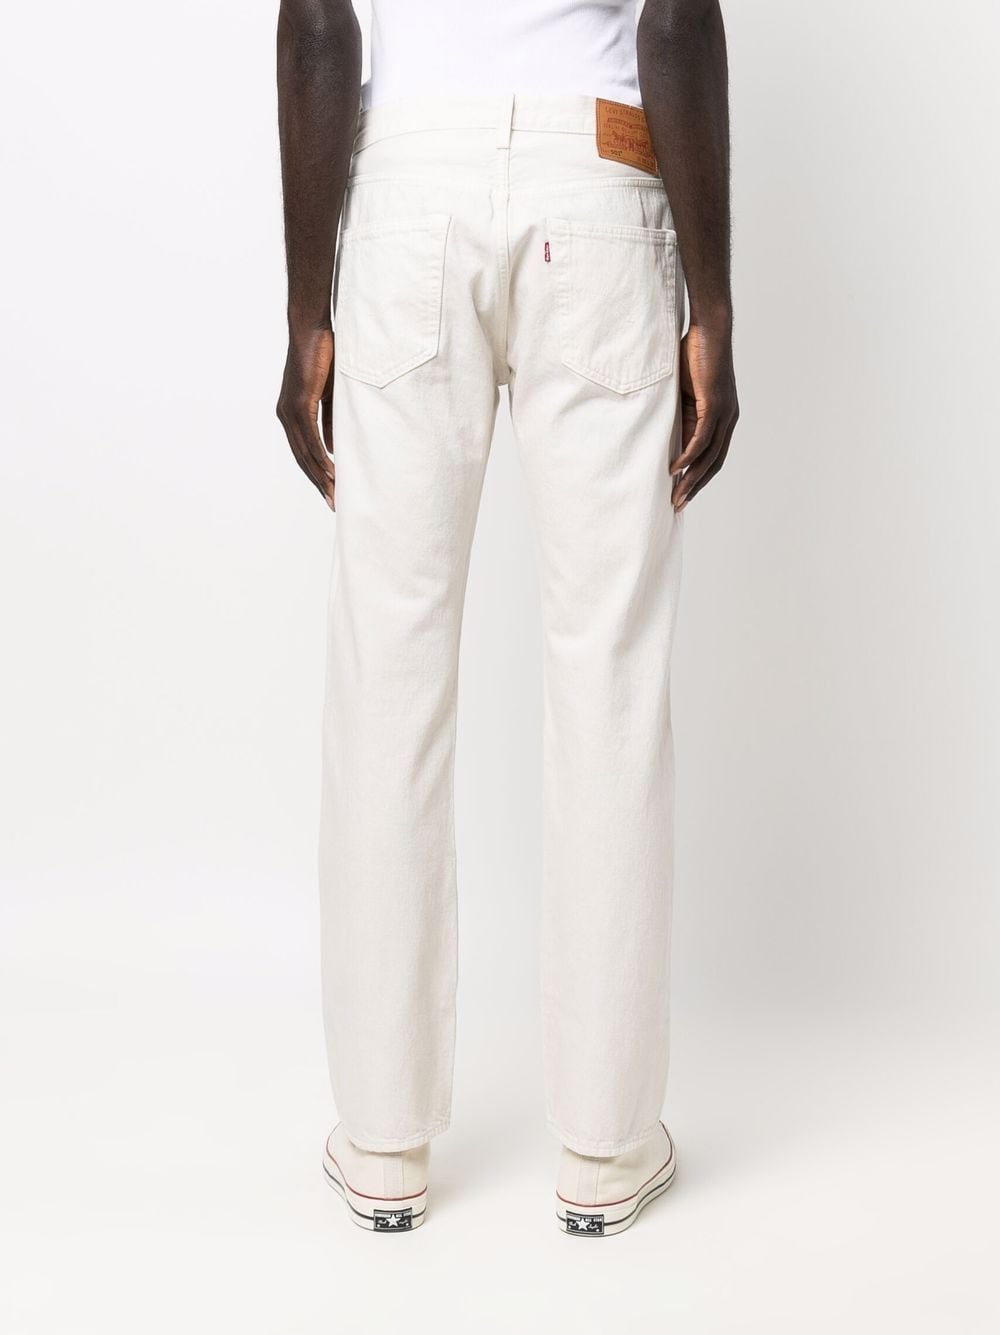 My Candy mid-rise straight-leg jeans<BR/><BR/><BR/>